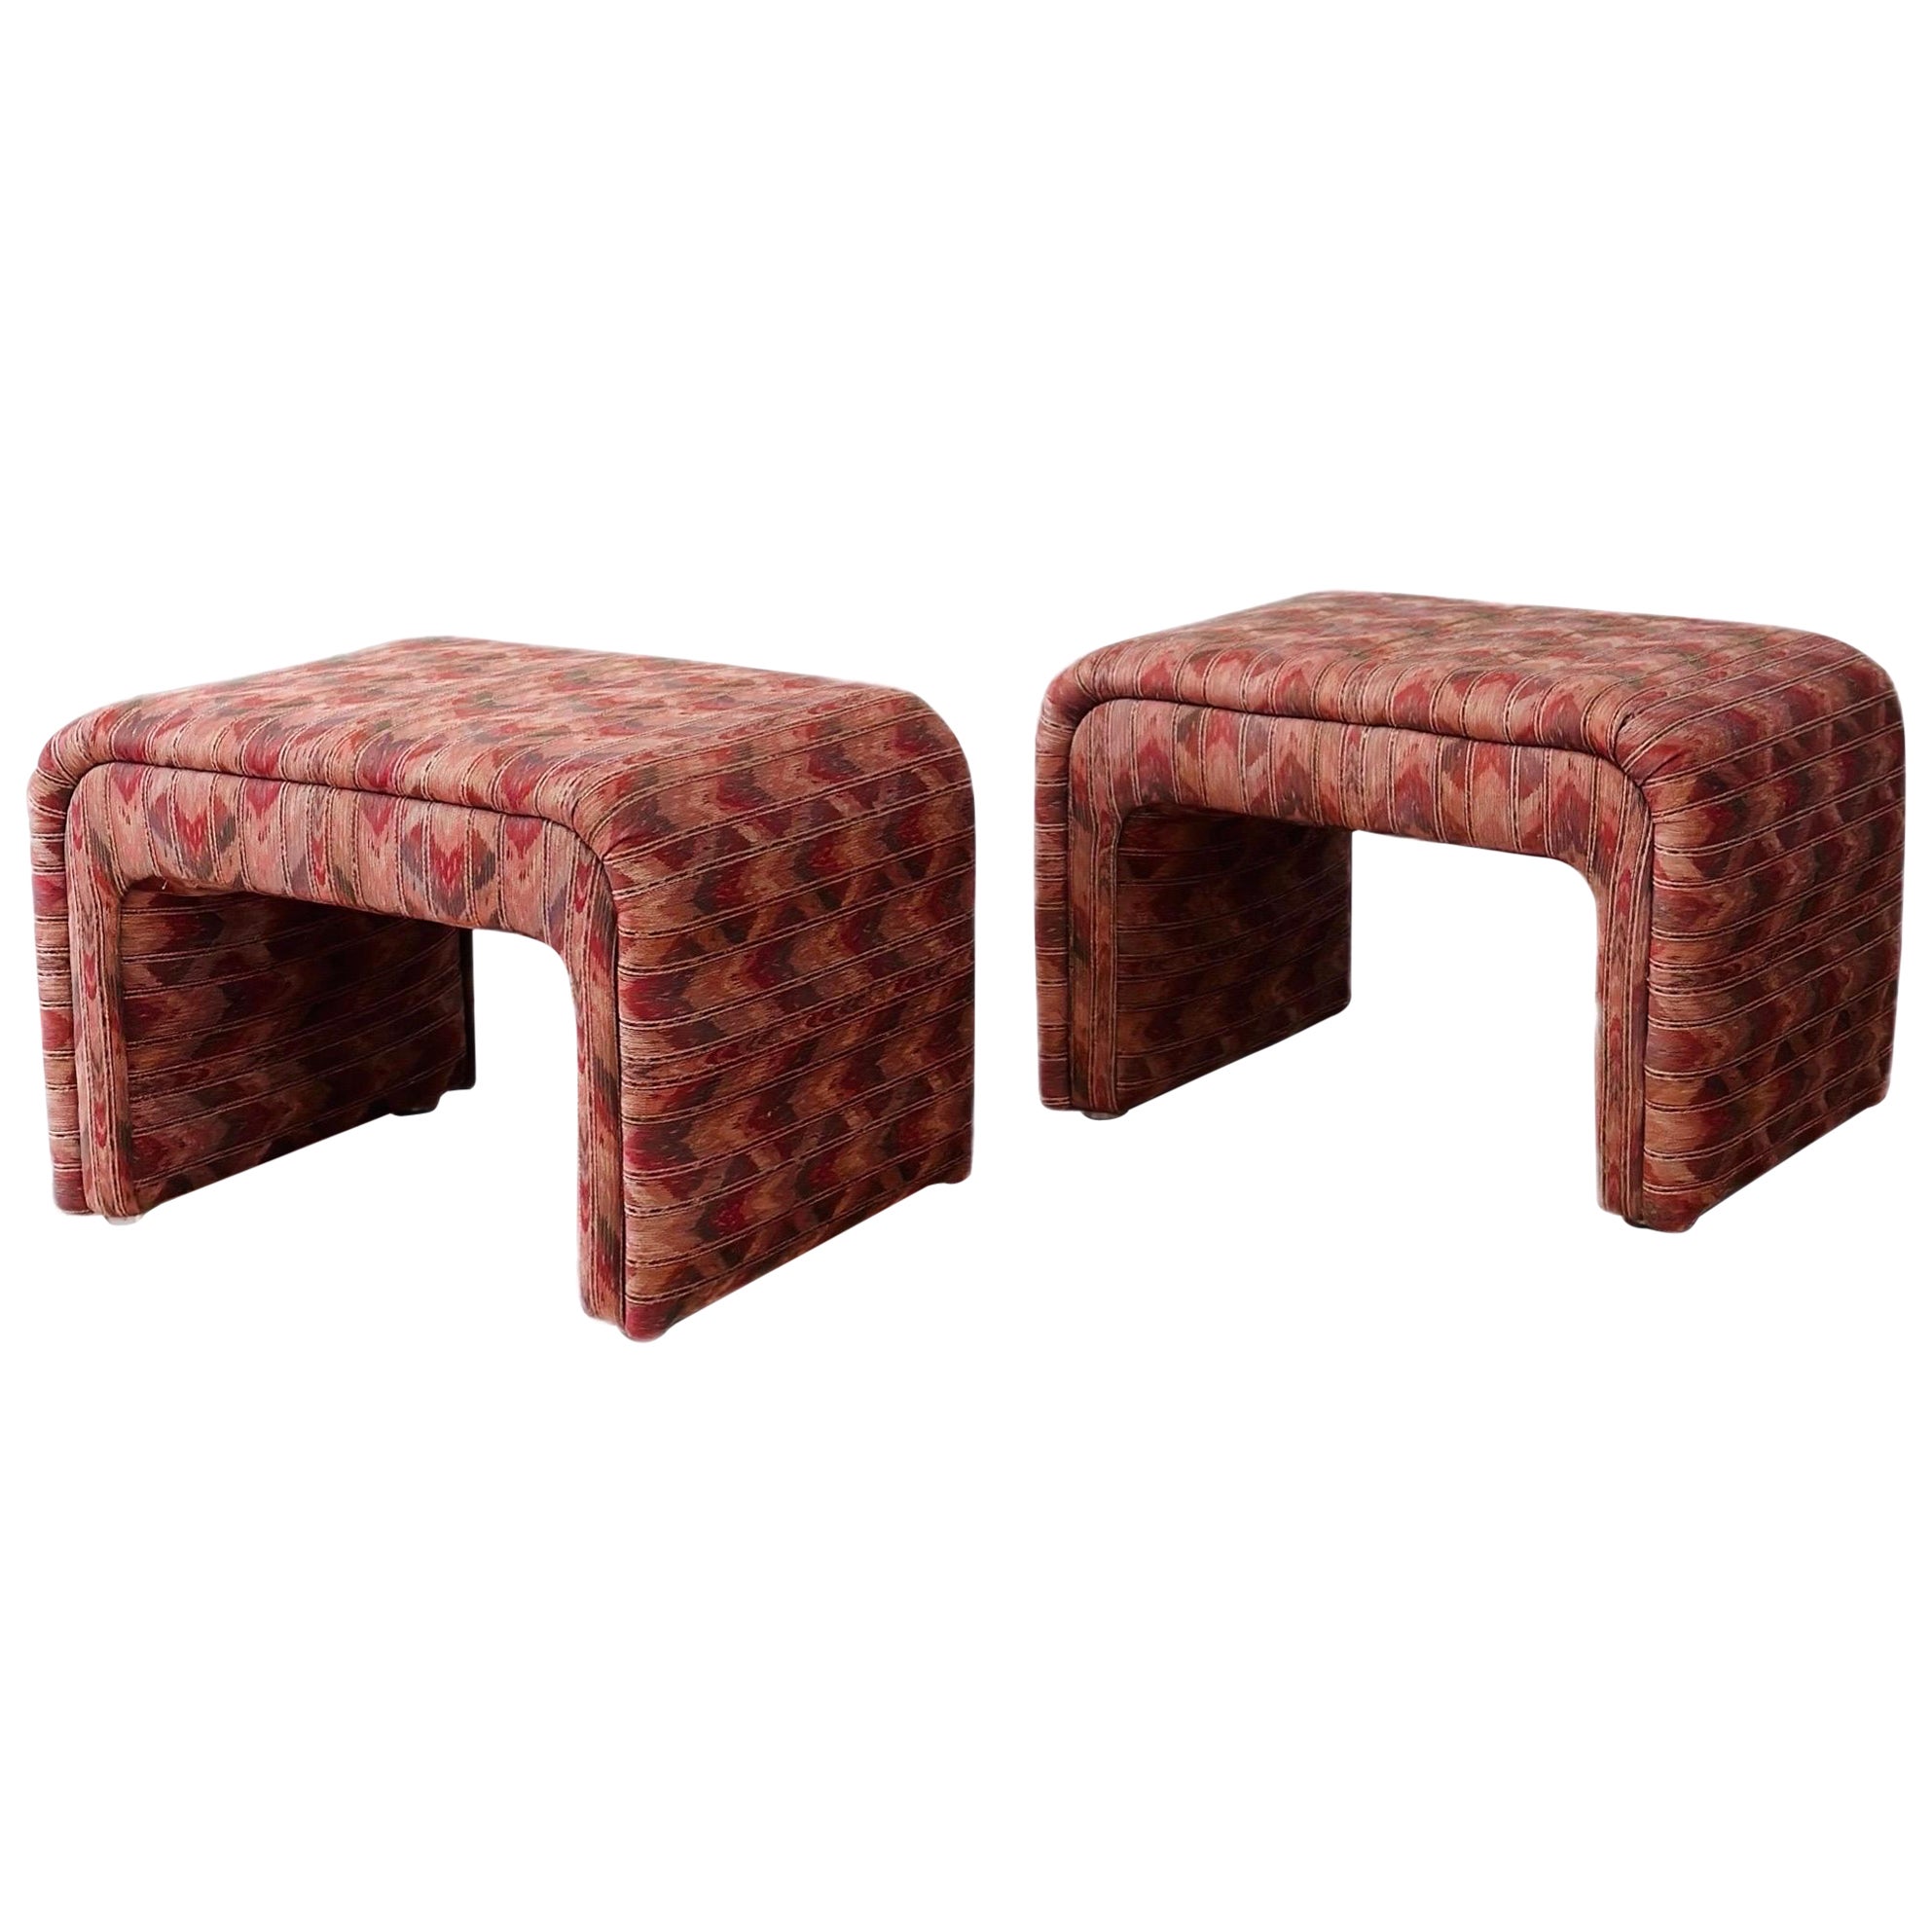 1980s Thayer Coggin Waterfall Zig Zag Pattern Upholstered Ottomans - a Pair For Sale